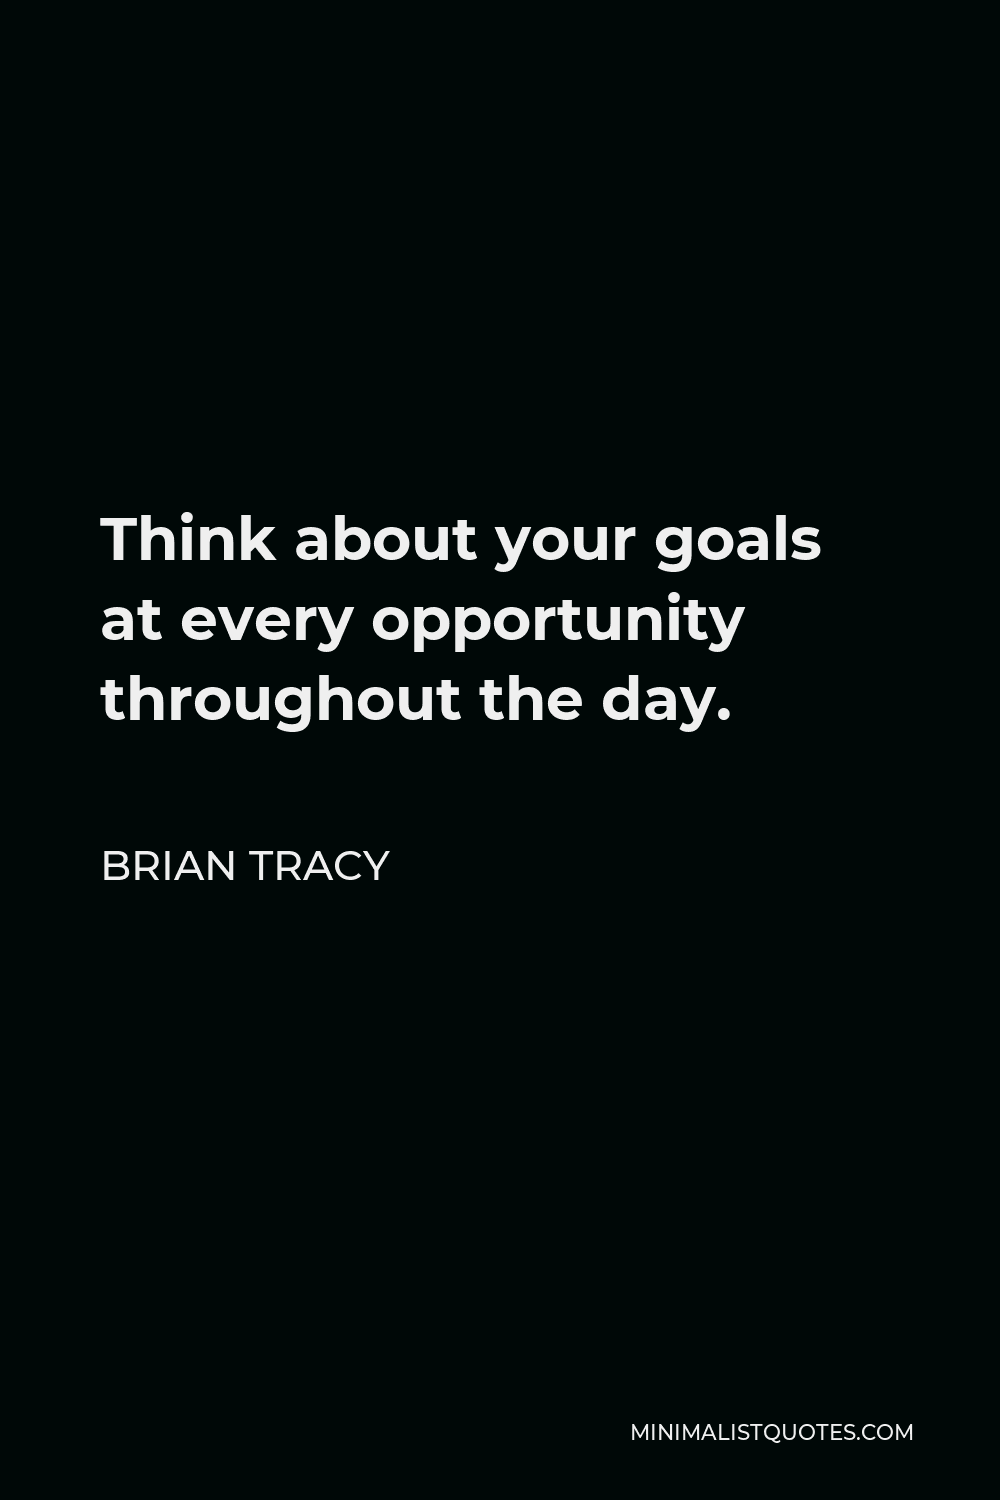 Brian Tracy Quote - Think about your goals at every opportunity throughout the day.